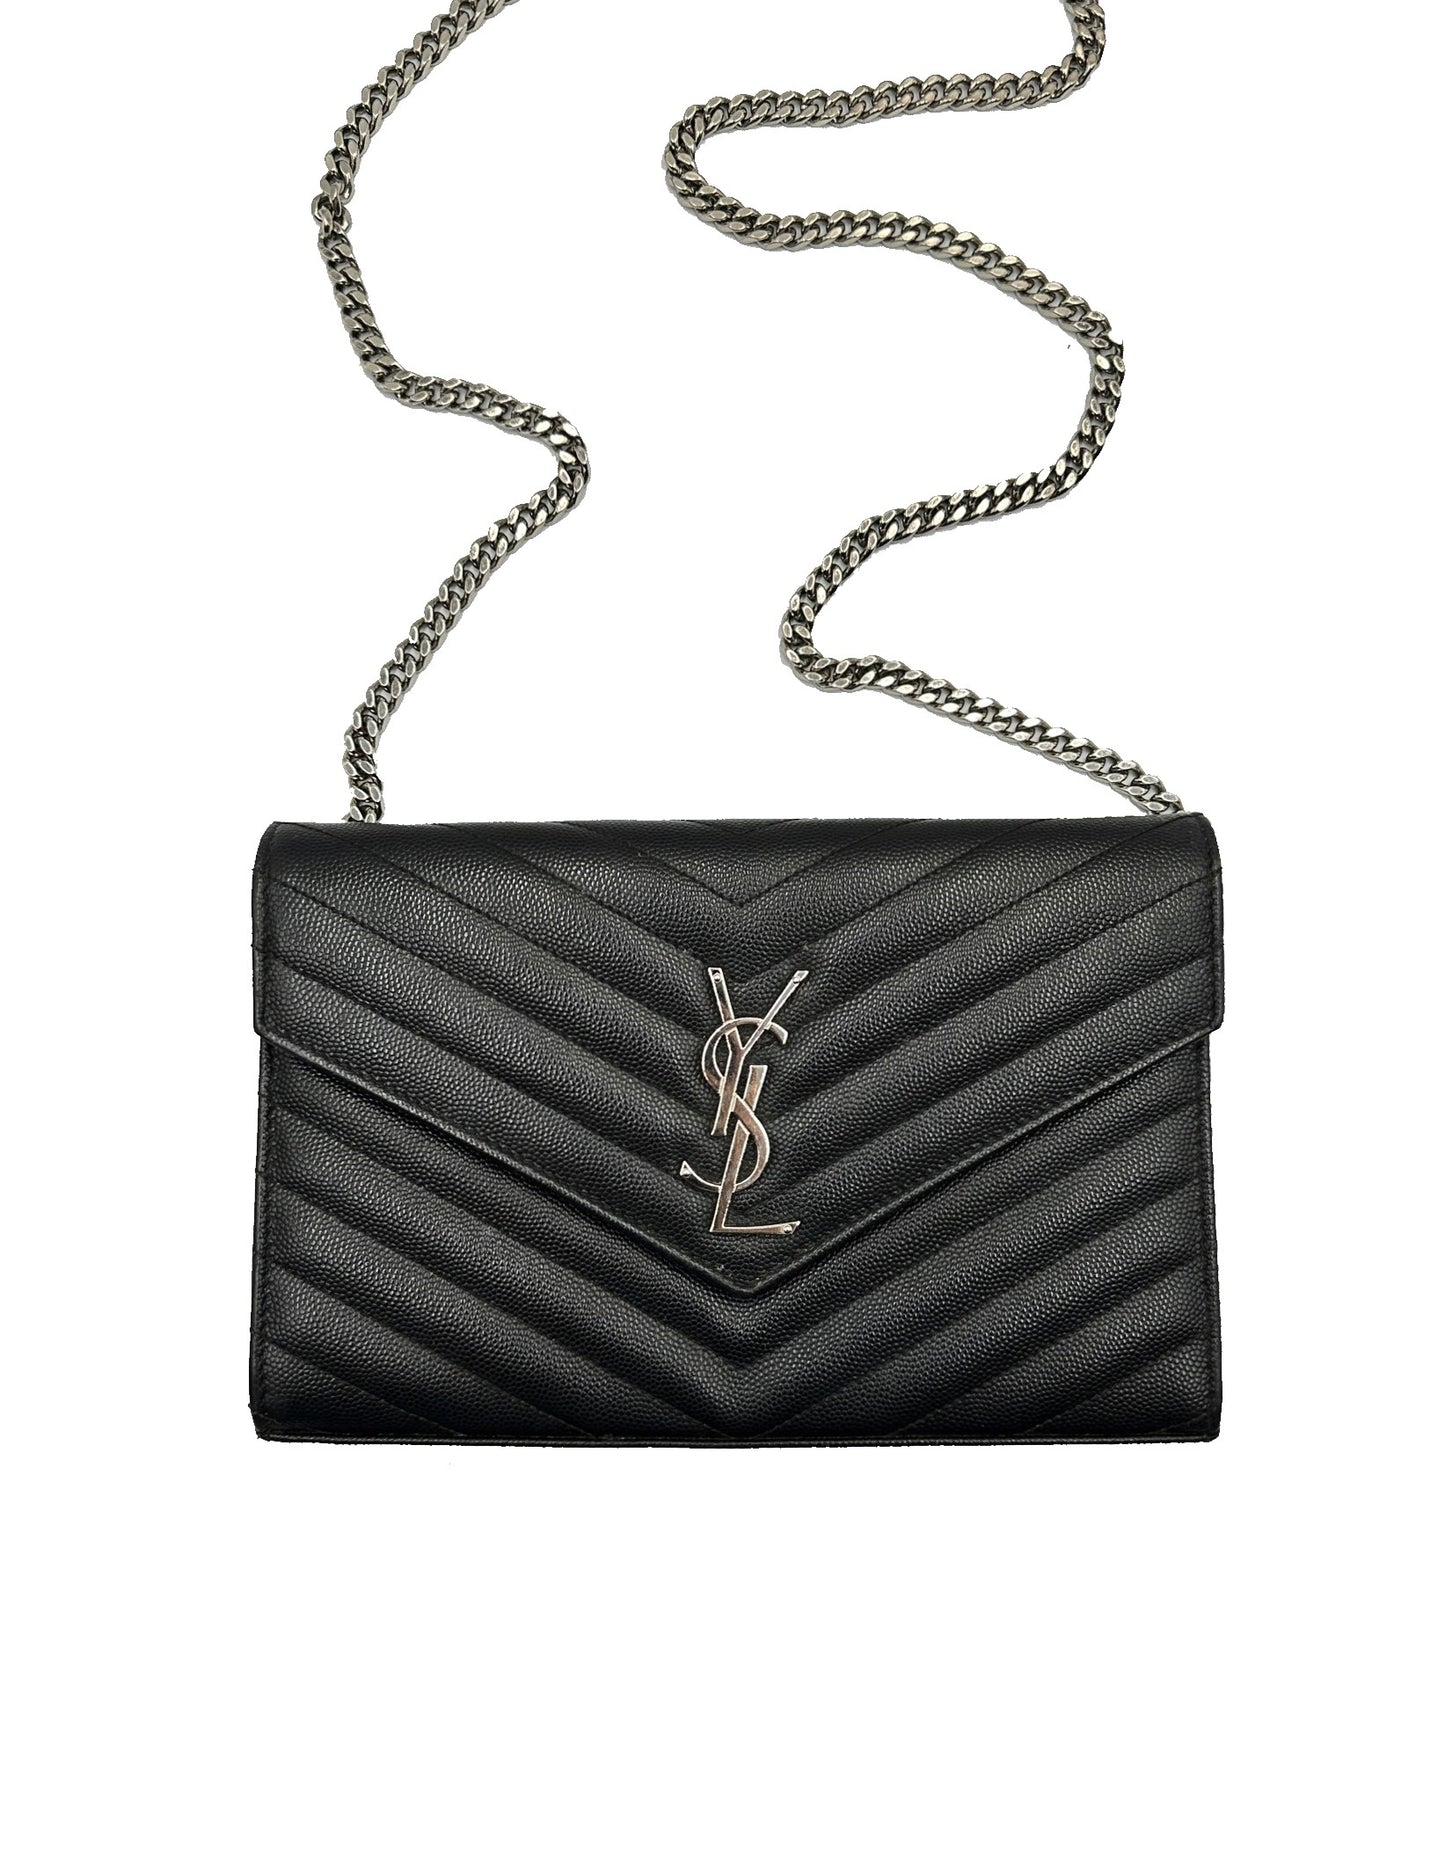 【Preowned】YSL Cassandre V紋荔枝牛皮WOC - 黑銀